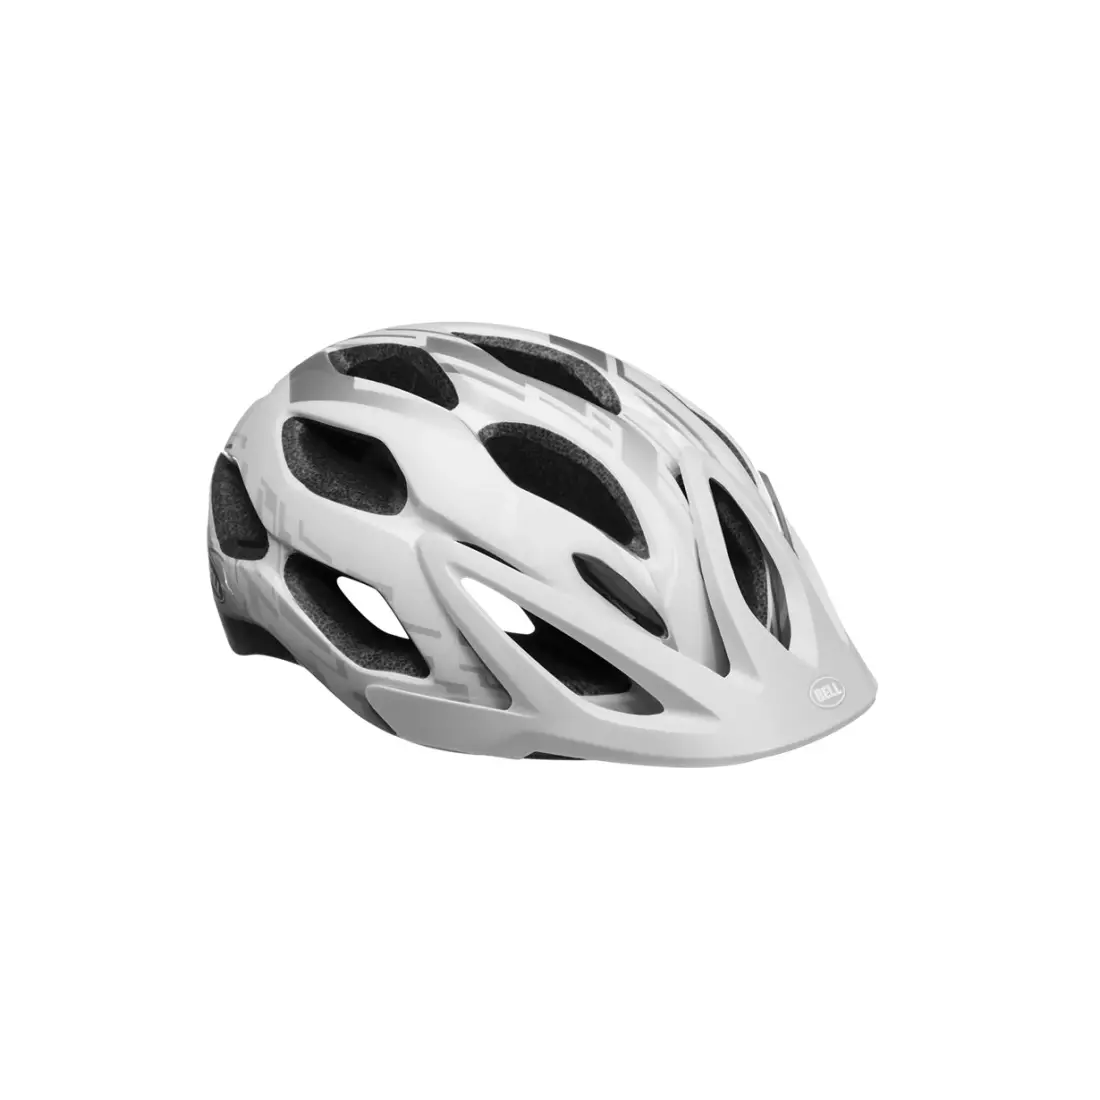 BELL INDY - bicycle helmet, white and silver